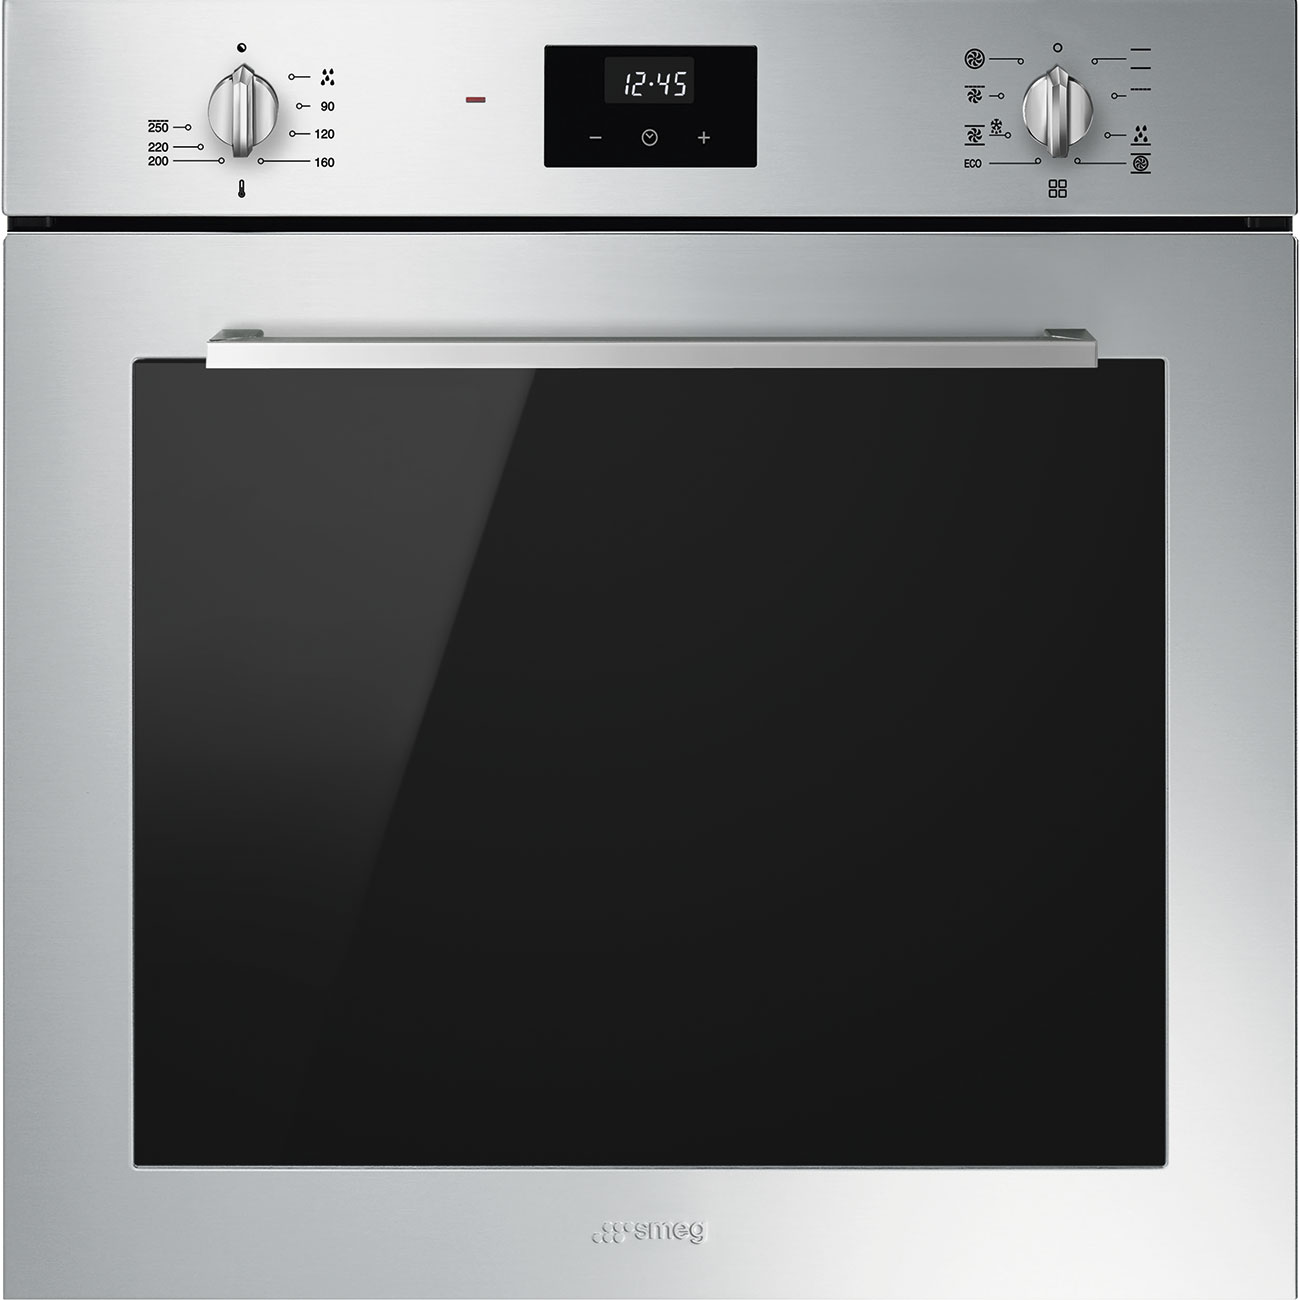 Oven Thermo-ventilated 60cm Smeg_1